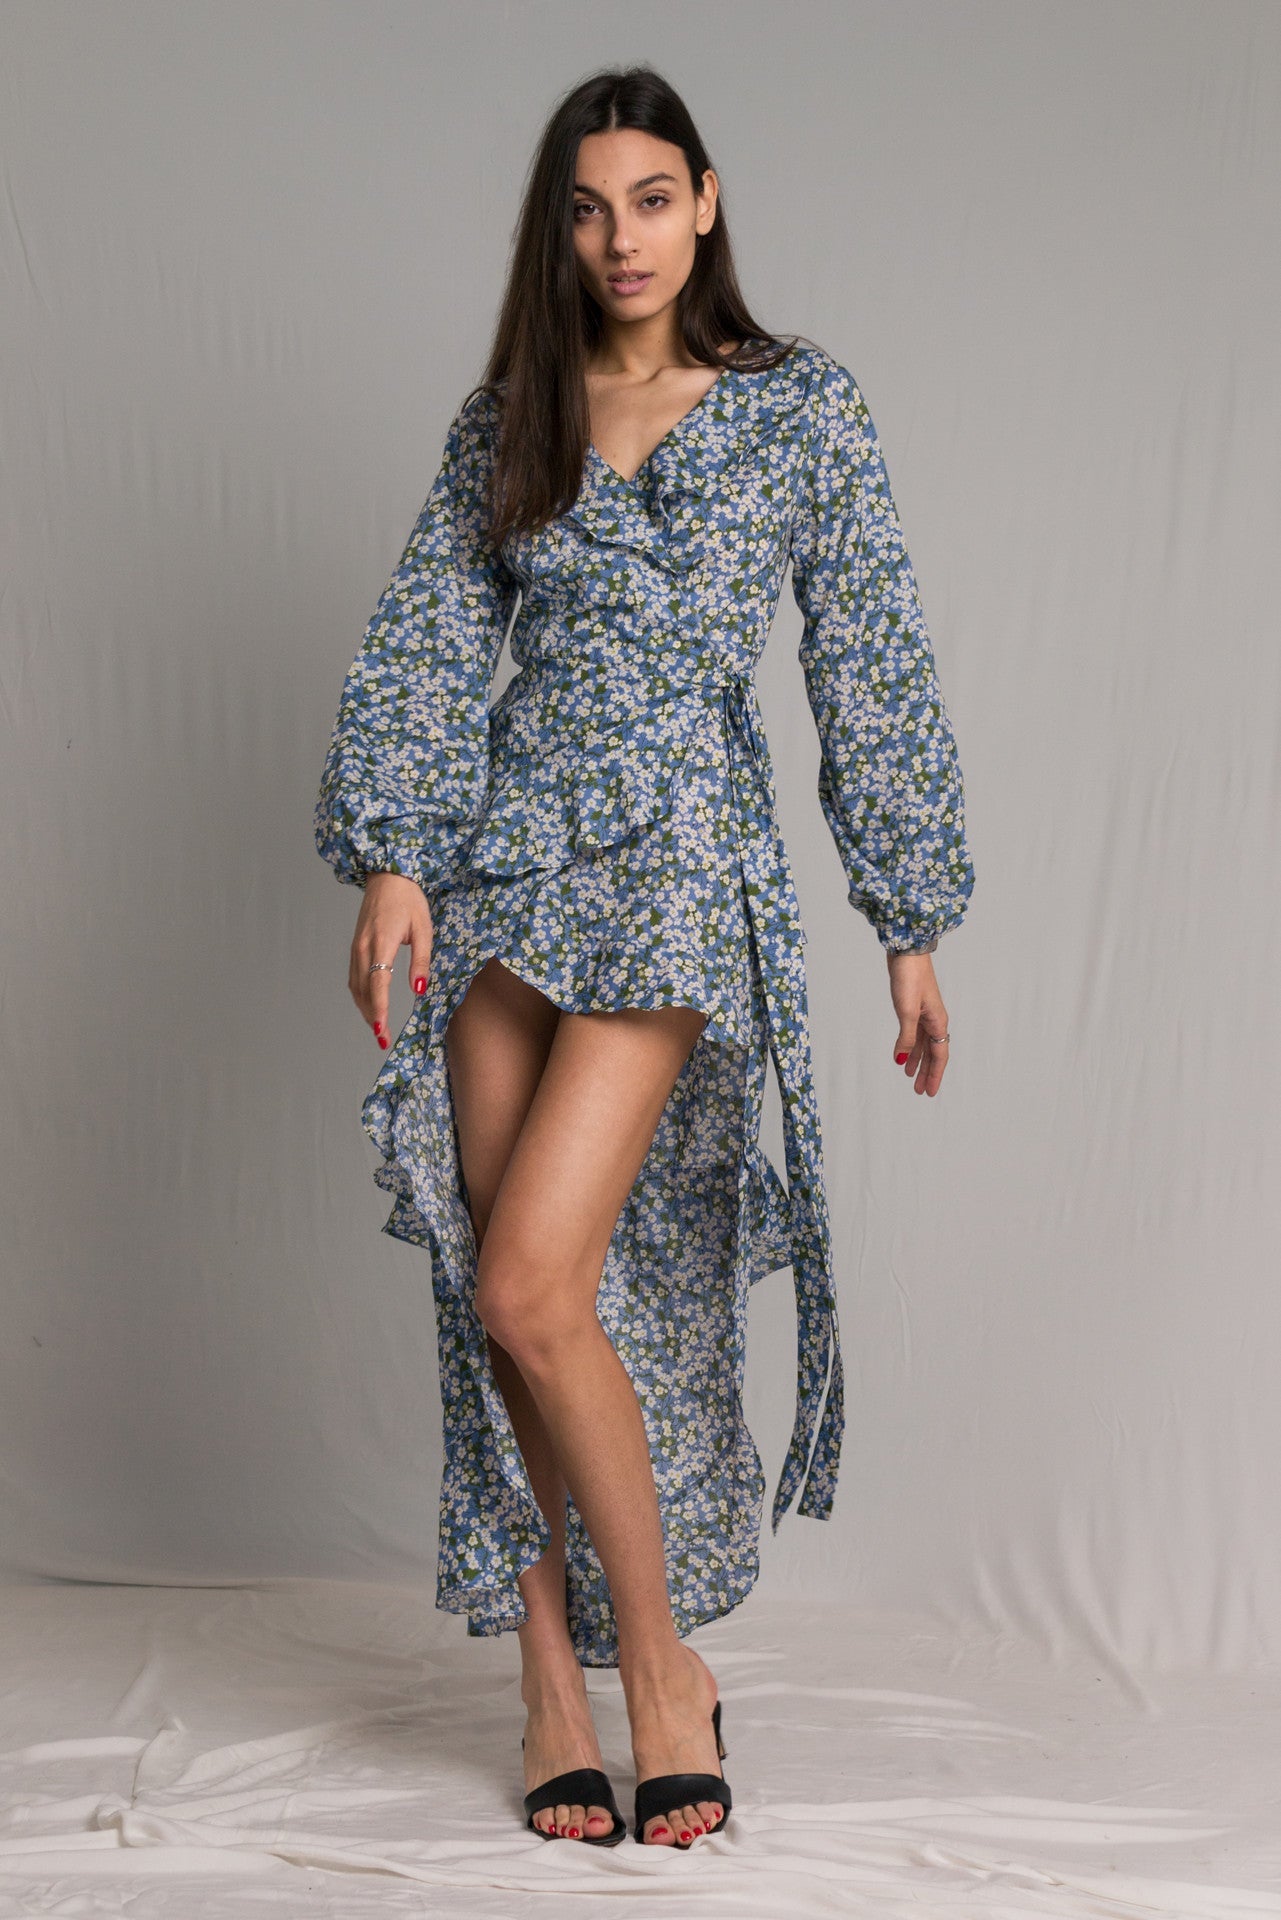 Floral dress with peasant sleeves a V-neckline asymmetric skirt with a wrap-around silhouette